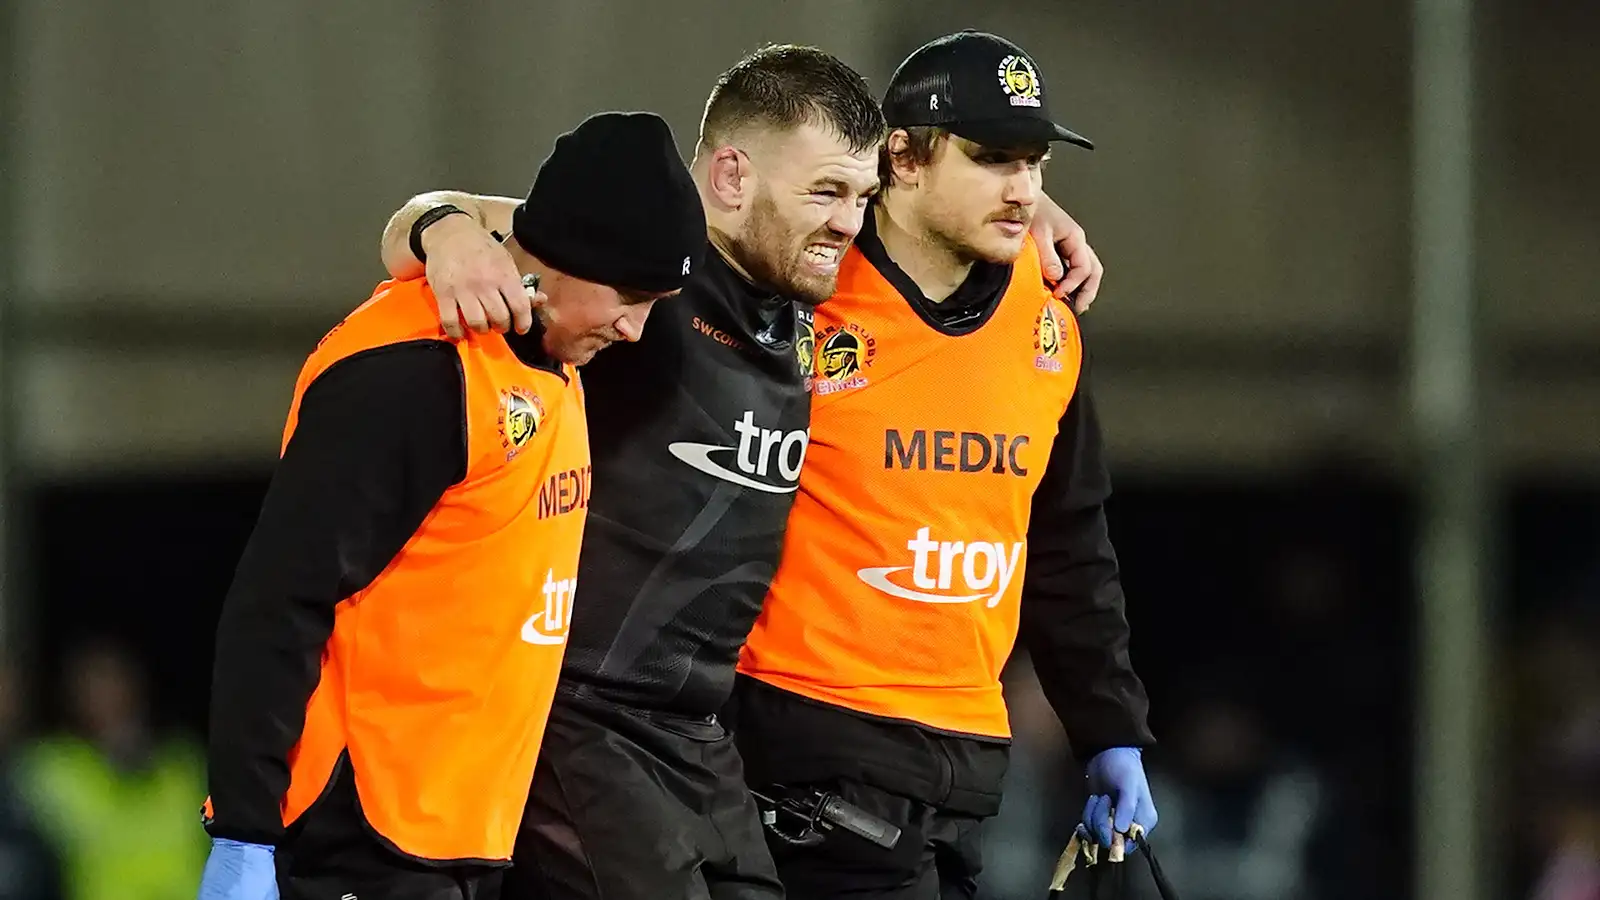 Luke Cowan-Dickie injured and could miss the Six Nations for England while Rob Baxter provides an update on Stuart Hogg ahead of the Champions Cup clash with the Bulls.